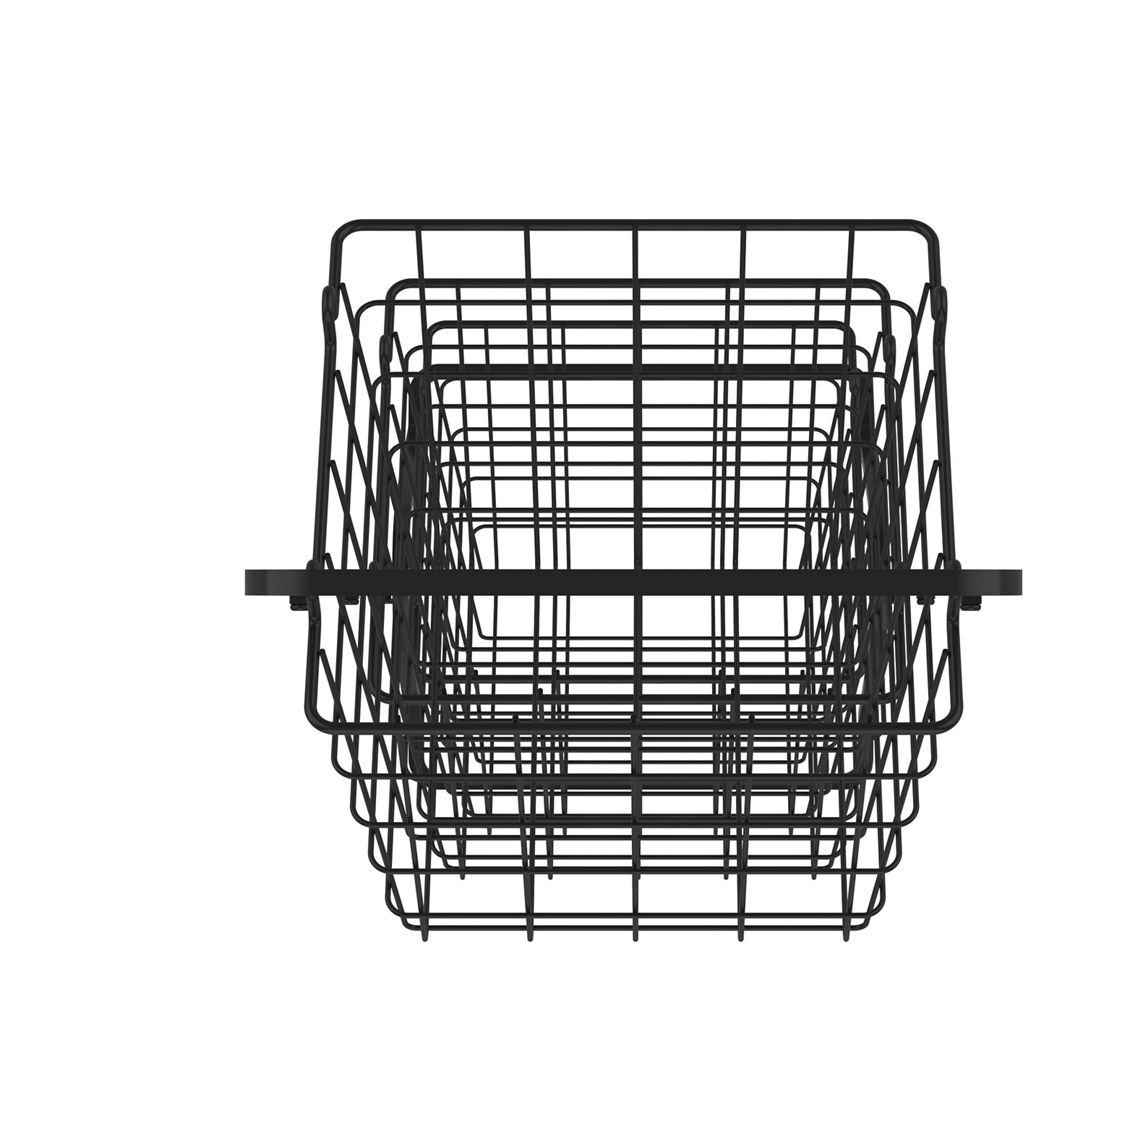 Oceanstar 3-Tier Metal Wire Storage Basket Stand with Removable Baskets – Black - Image 5 of 5